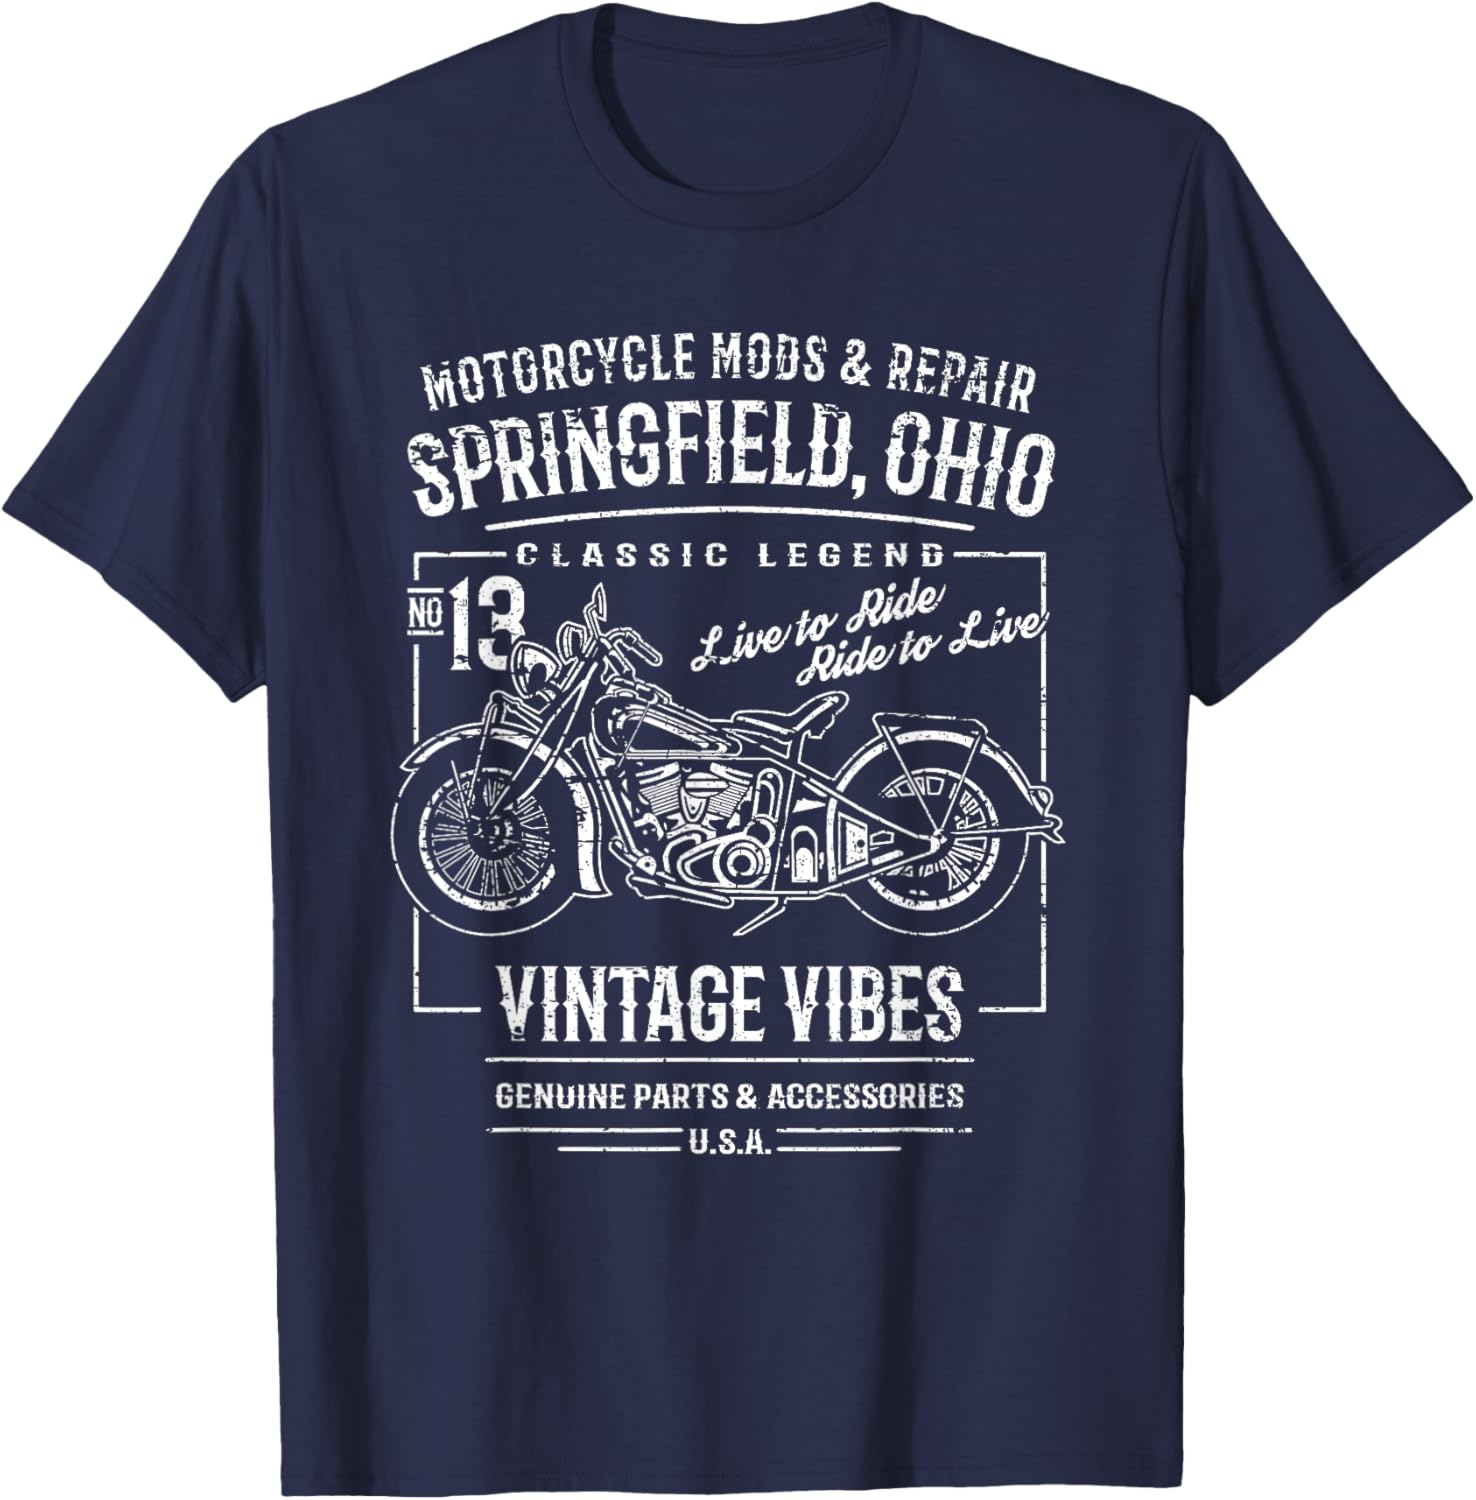 Springfield OH USA Vintage Style Motorcycle Adventure Design T-Shirt